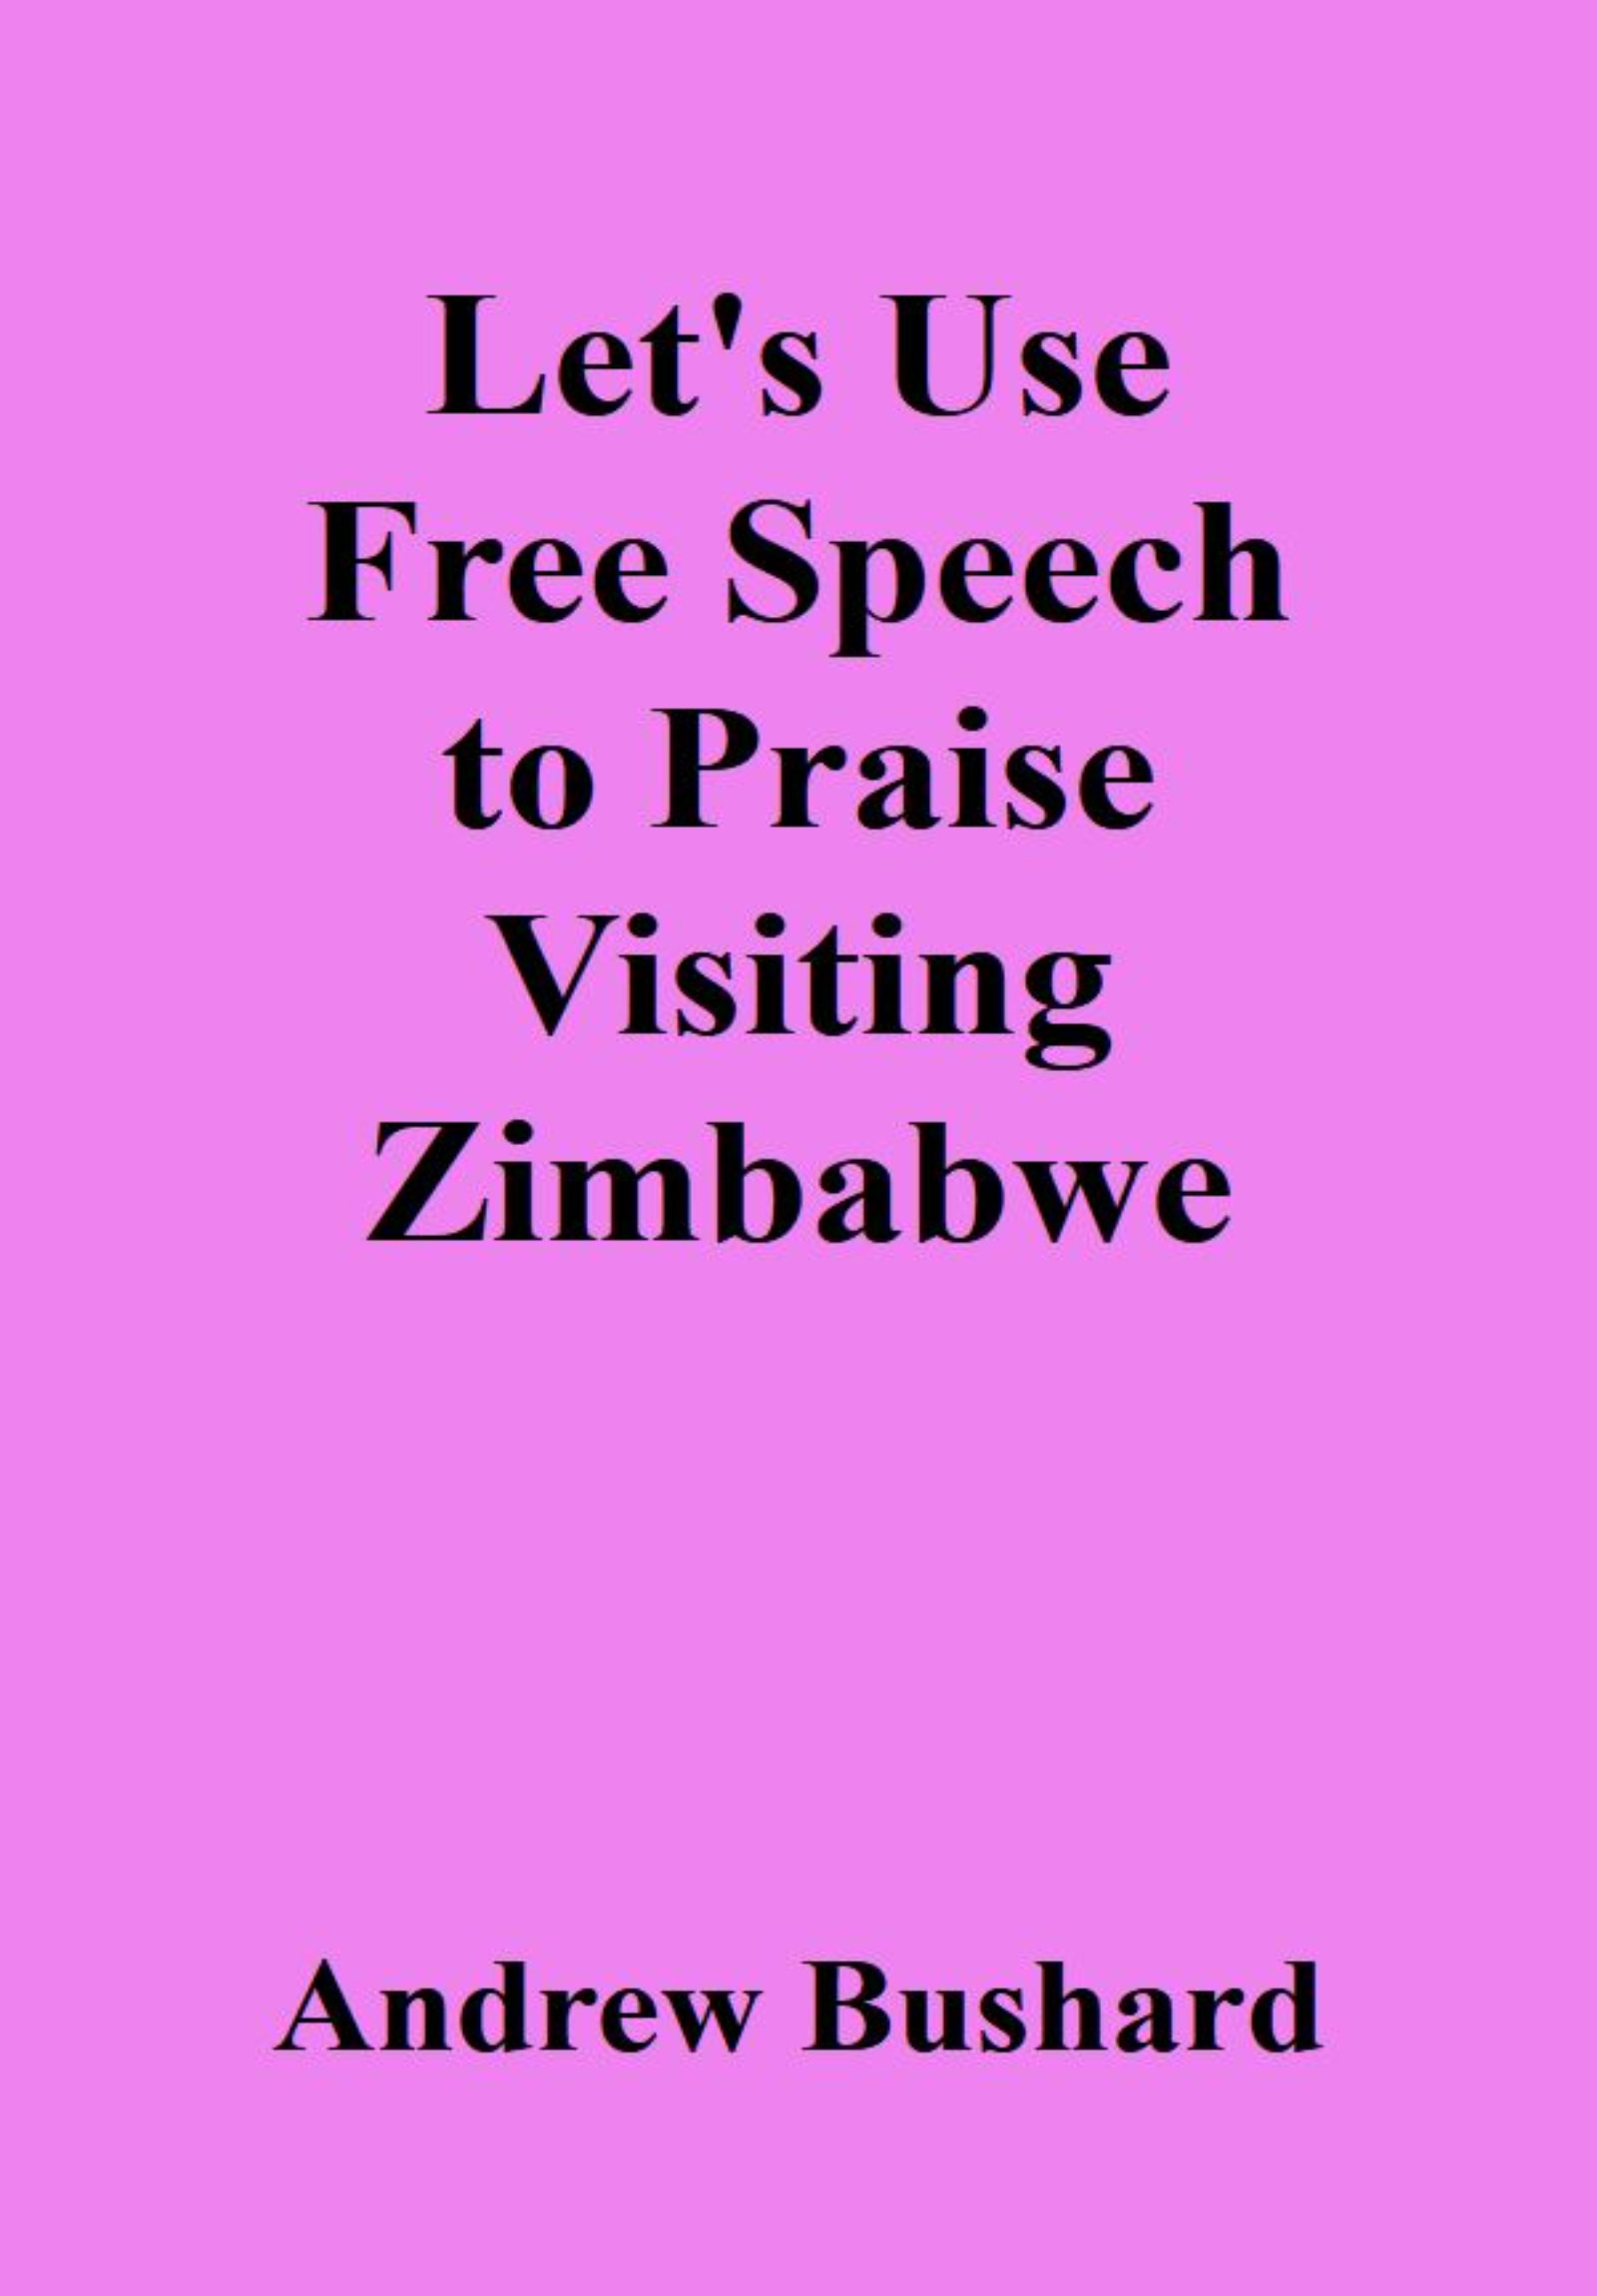 Let's Use Free Speech to Praise Visiting Zimbabwe's featured image